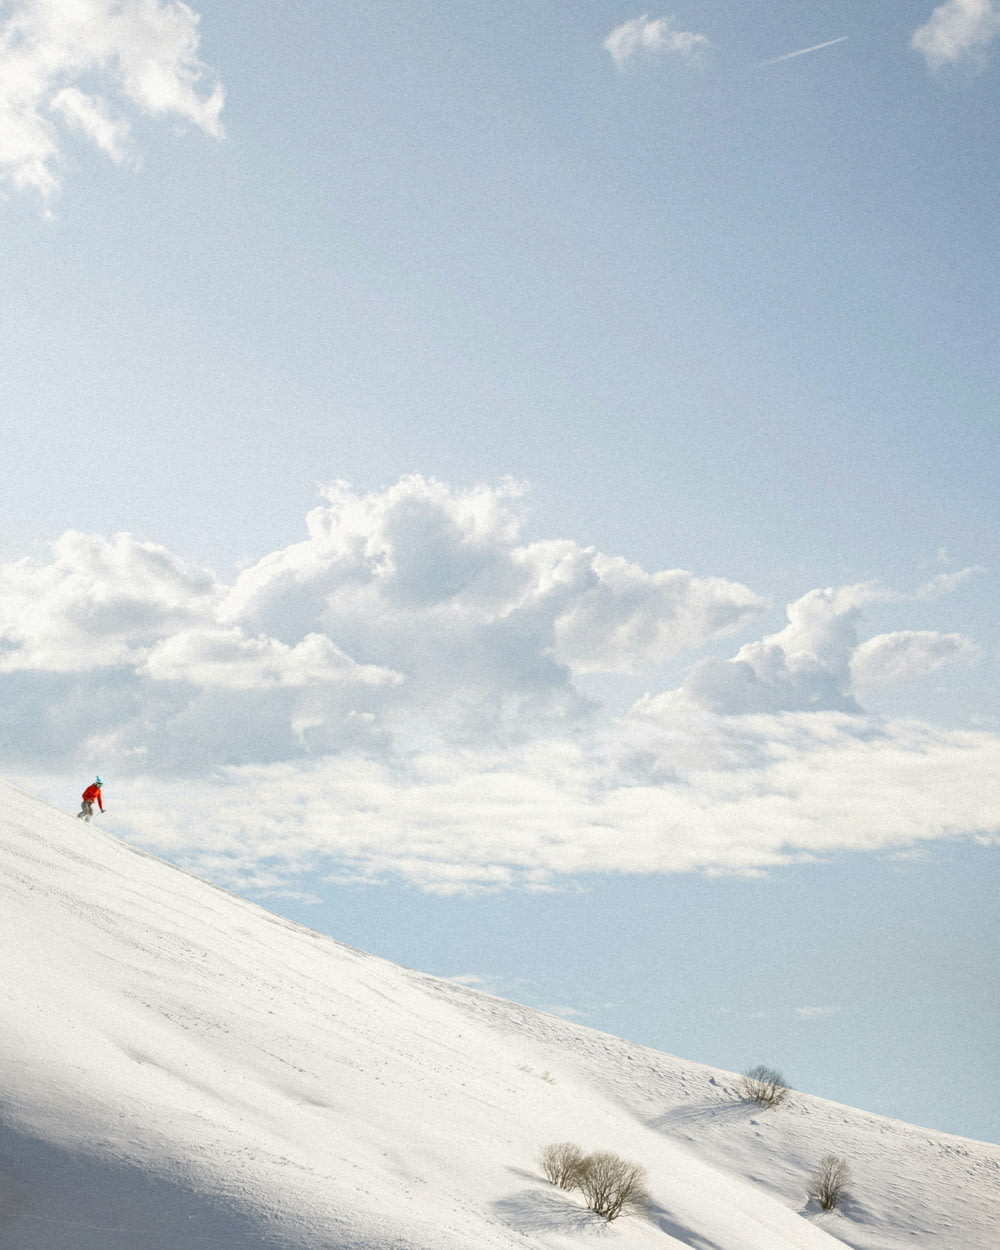 a person is skiing down a snowy hill